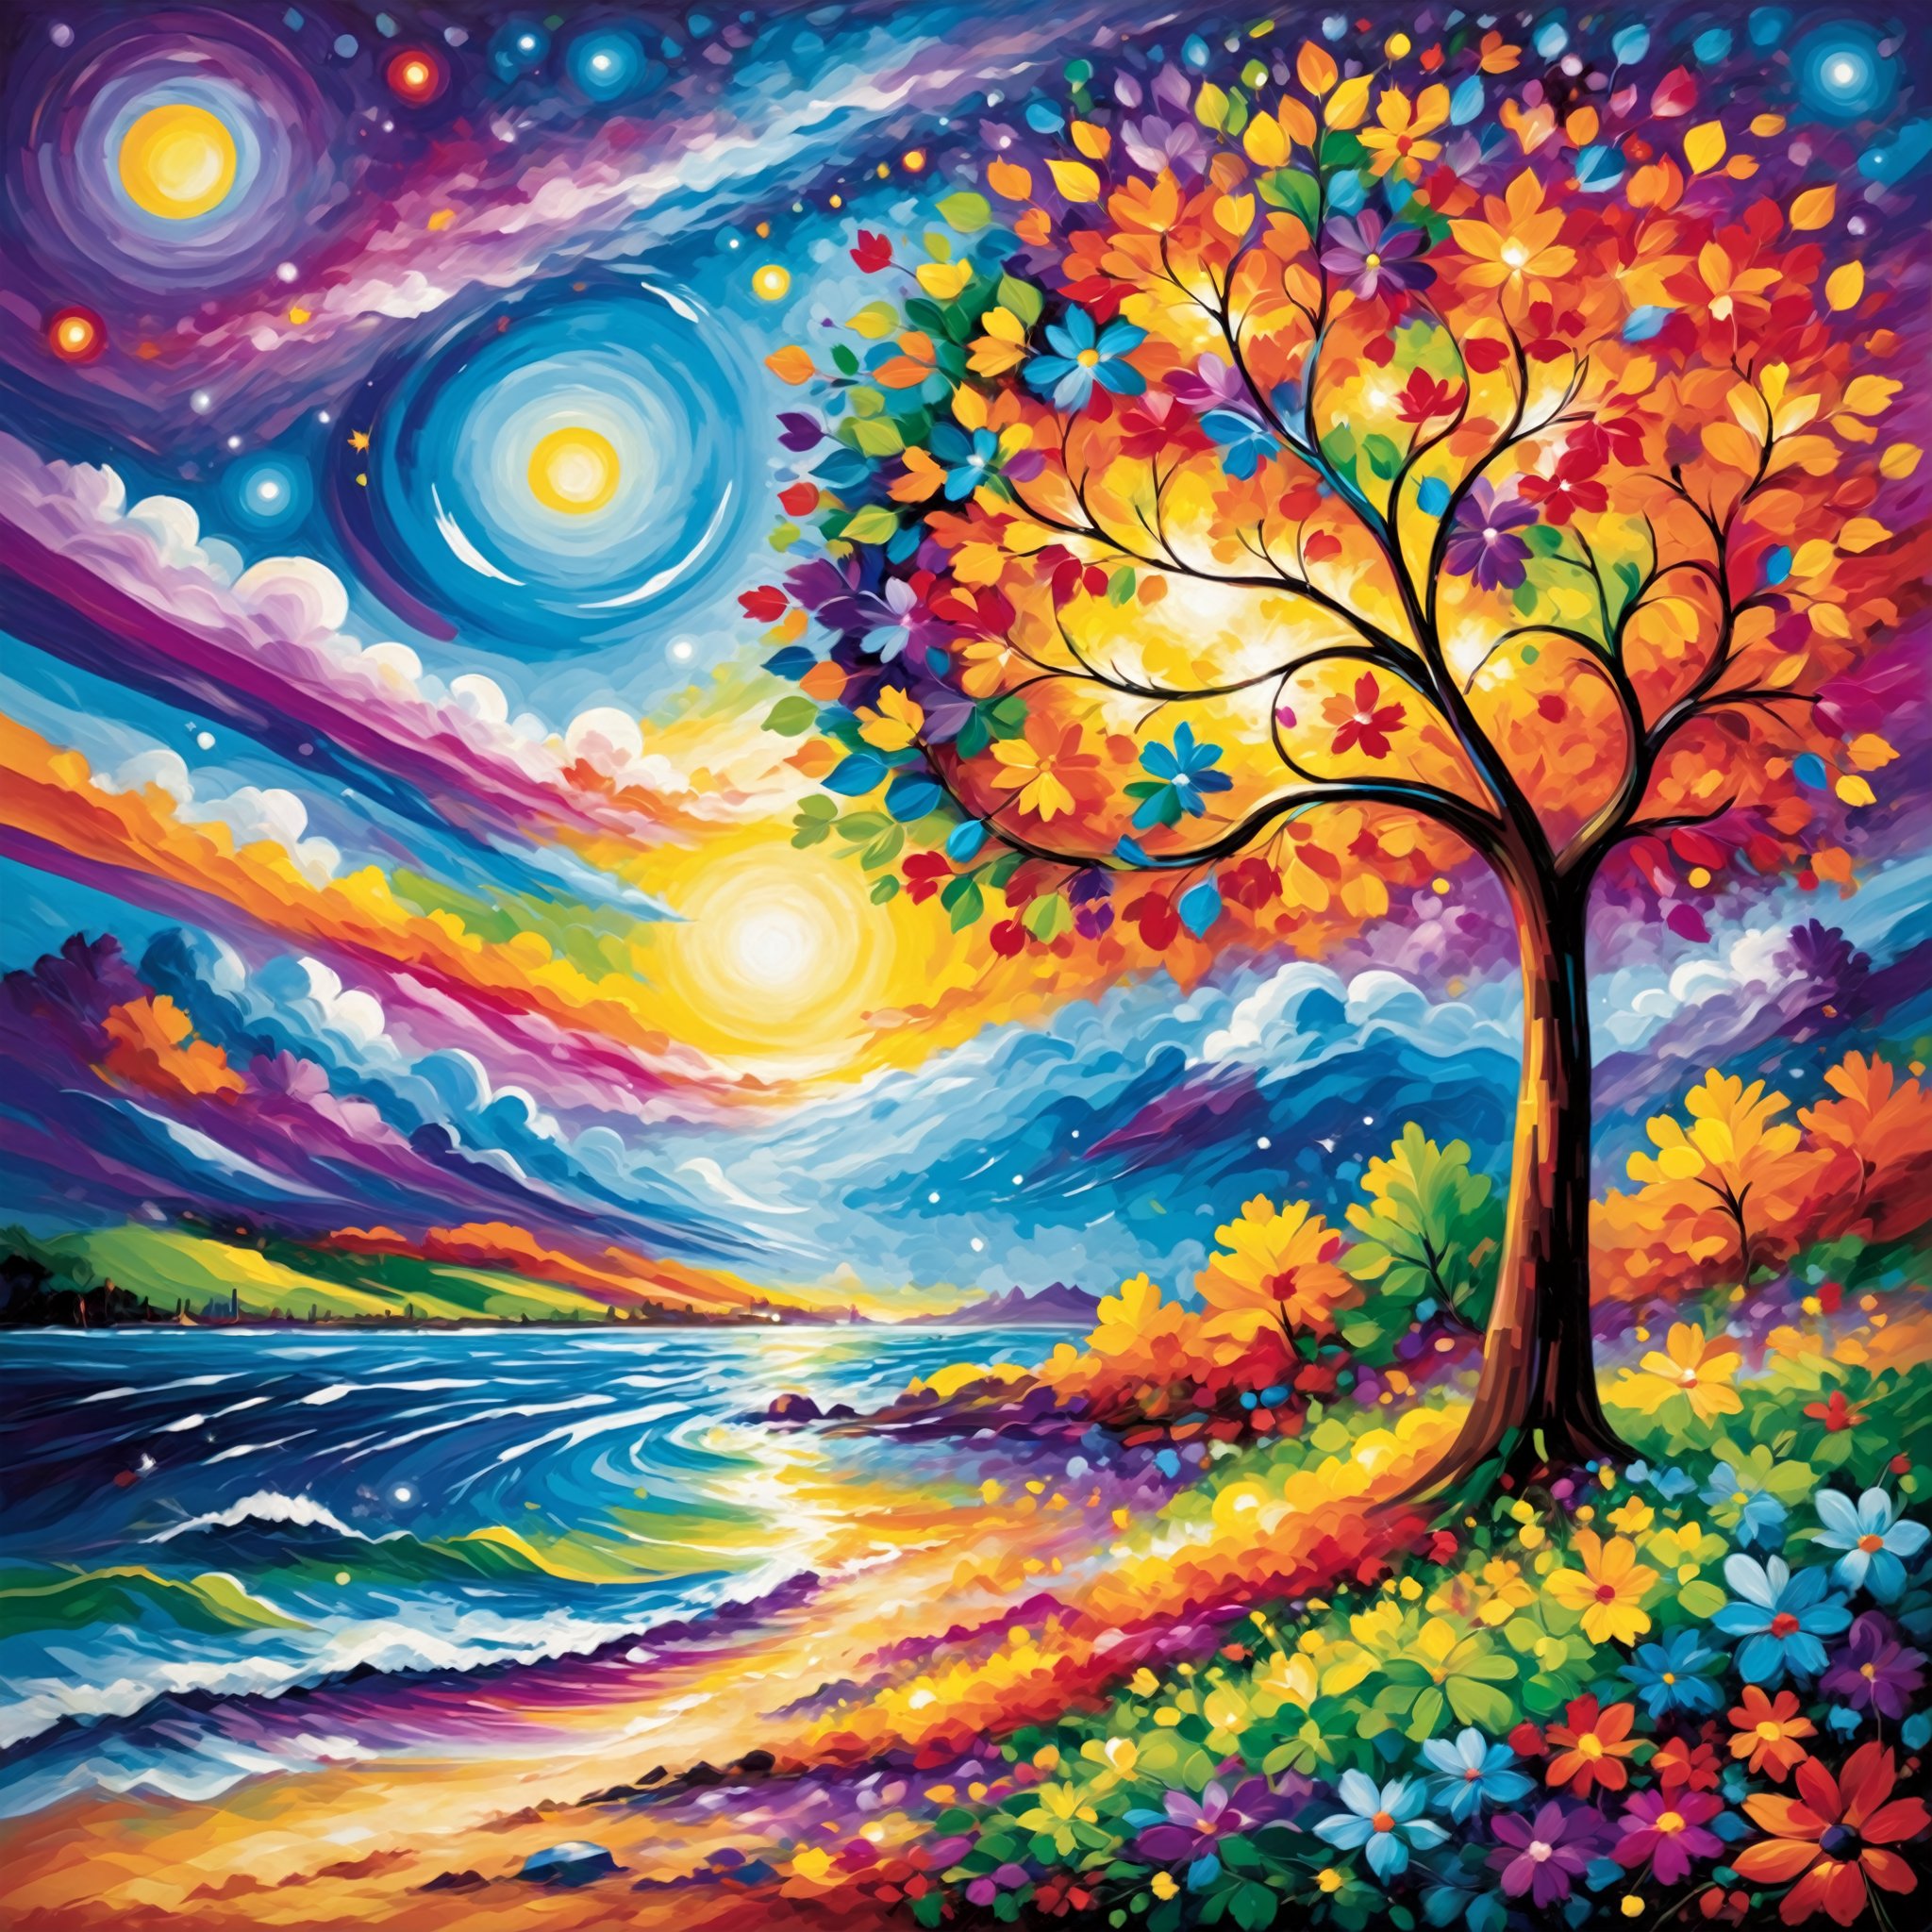 Create a lively and colorful artwork that celebrates the beauty of a vibrant world. Use a rich spectrum of hues to express positivity and joy. Let your imagination run free, infusing intricate details and dynamic energy into your creation to captivate viewers. Colourful Artie Style